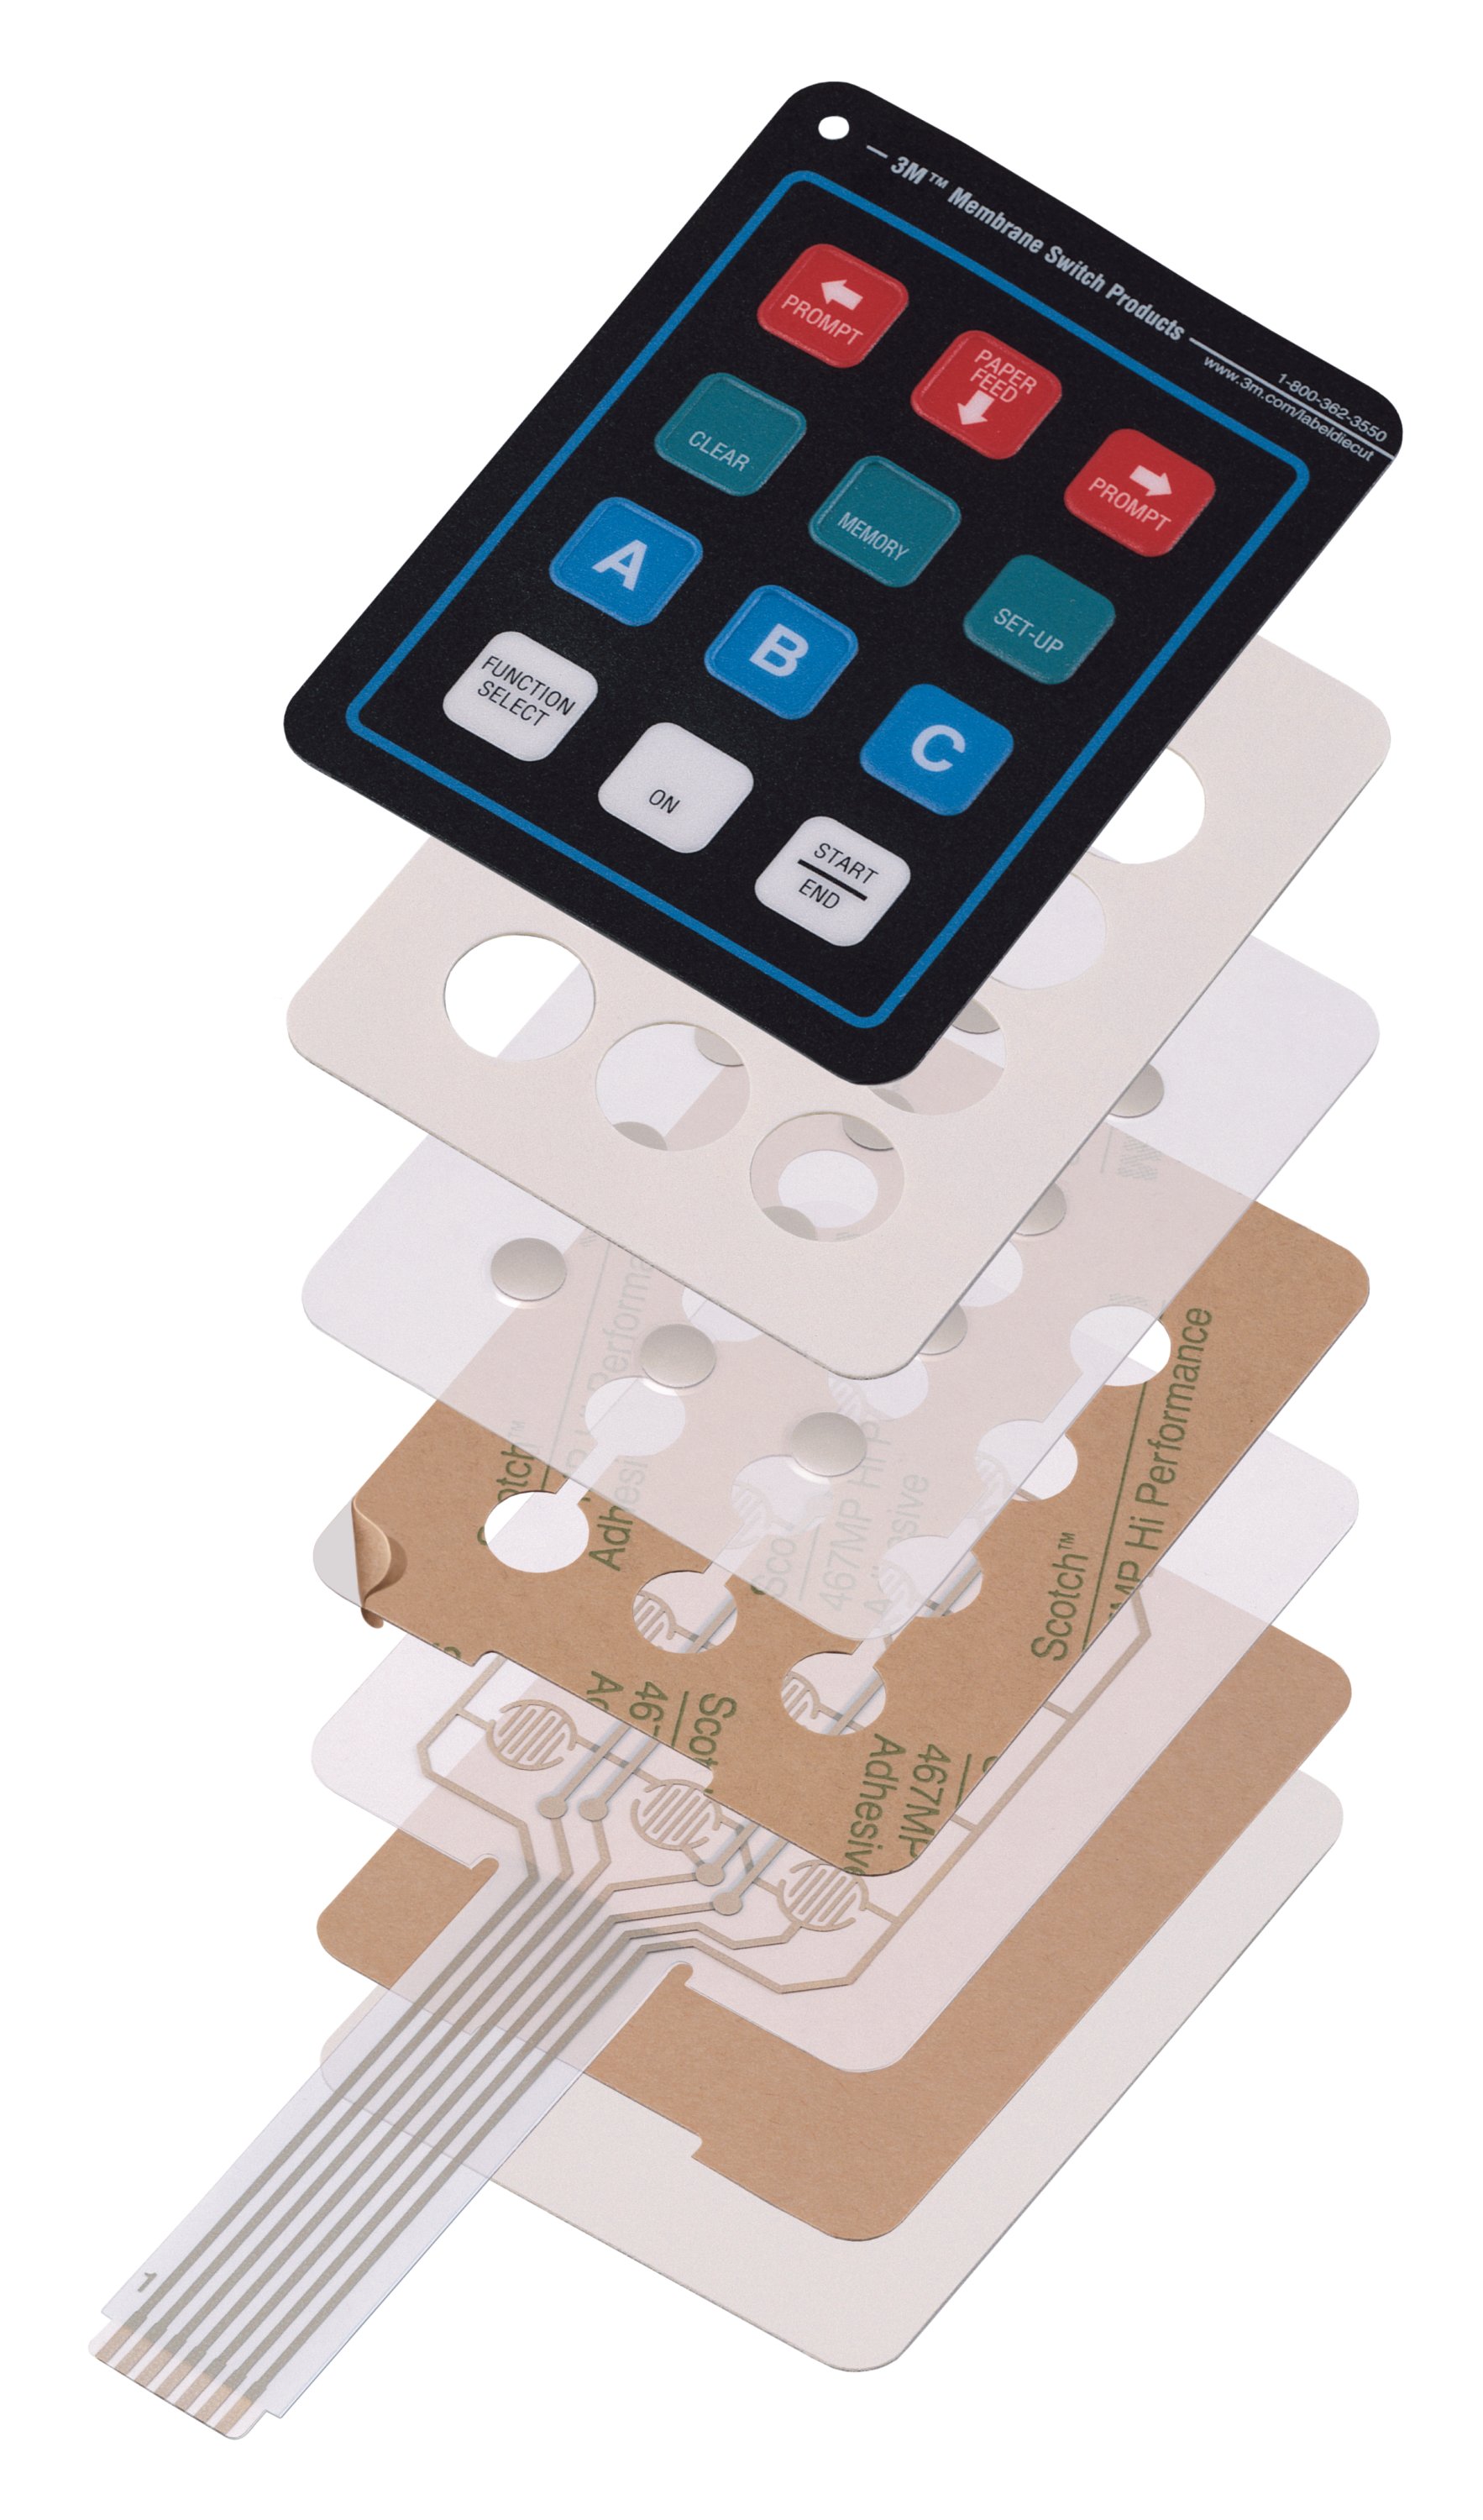 3M™ Membrane Switch Spacer 7945MP is constructed with 2.0 mil high performance acrylic adhesive that is coated on each side of a 1.0 mil polyester film carrier